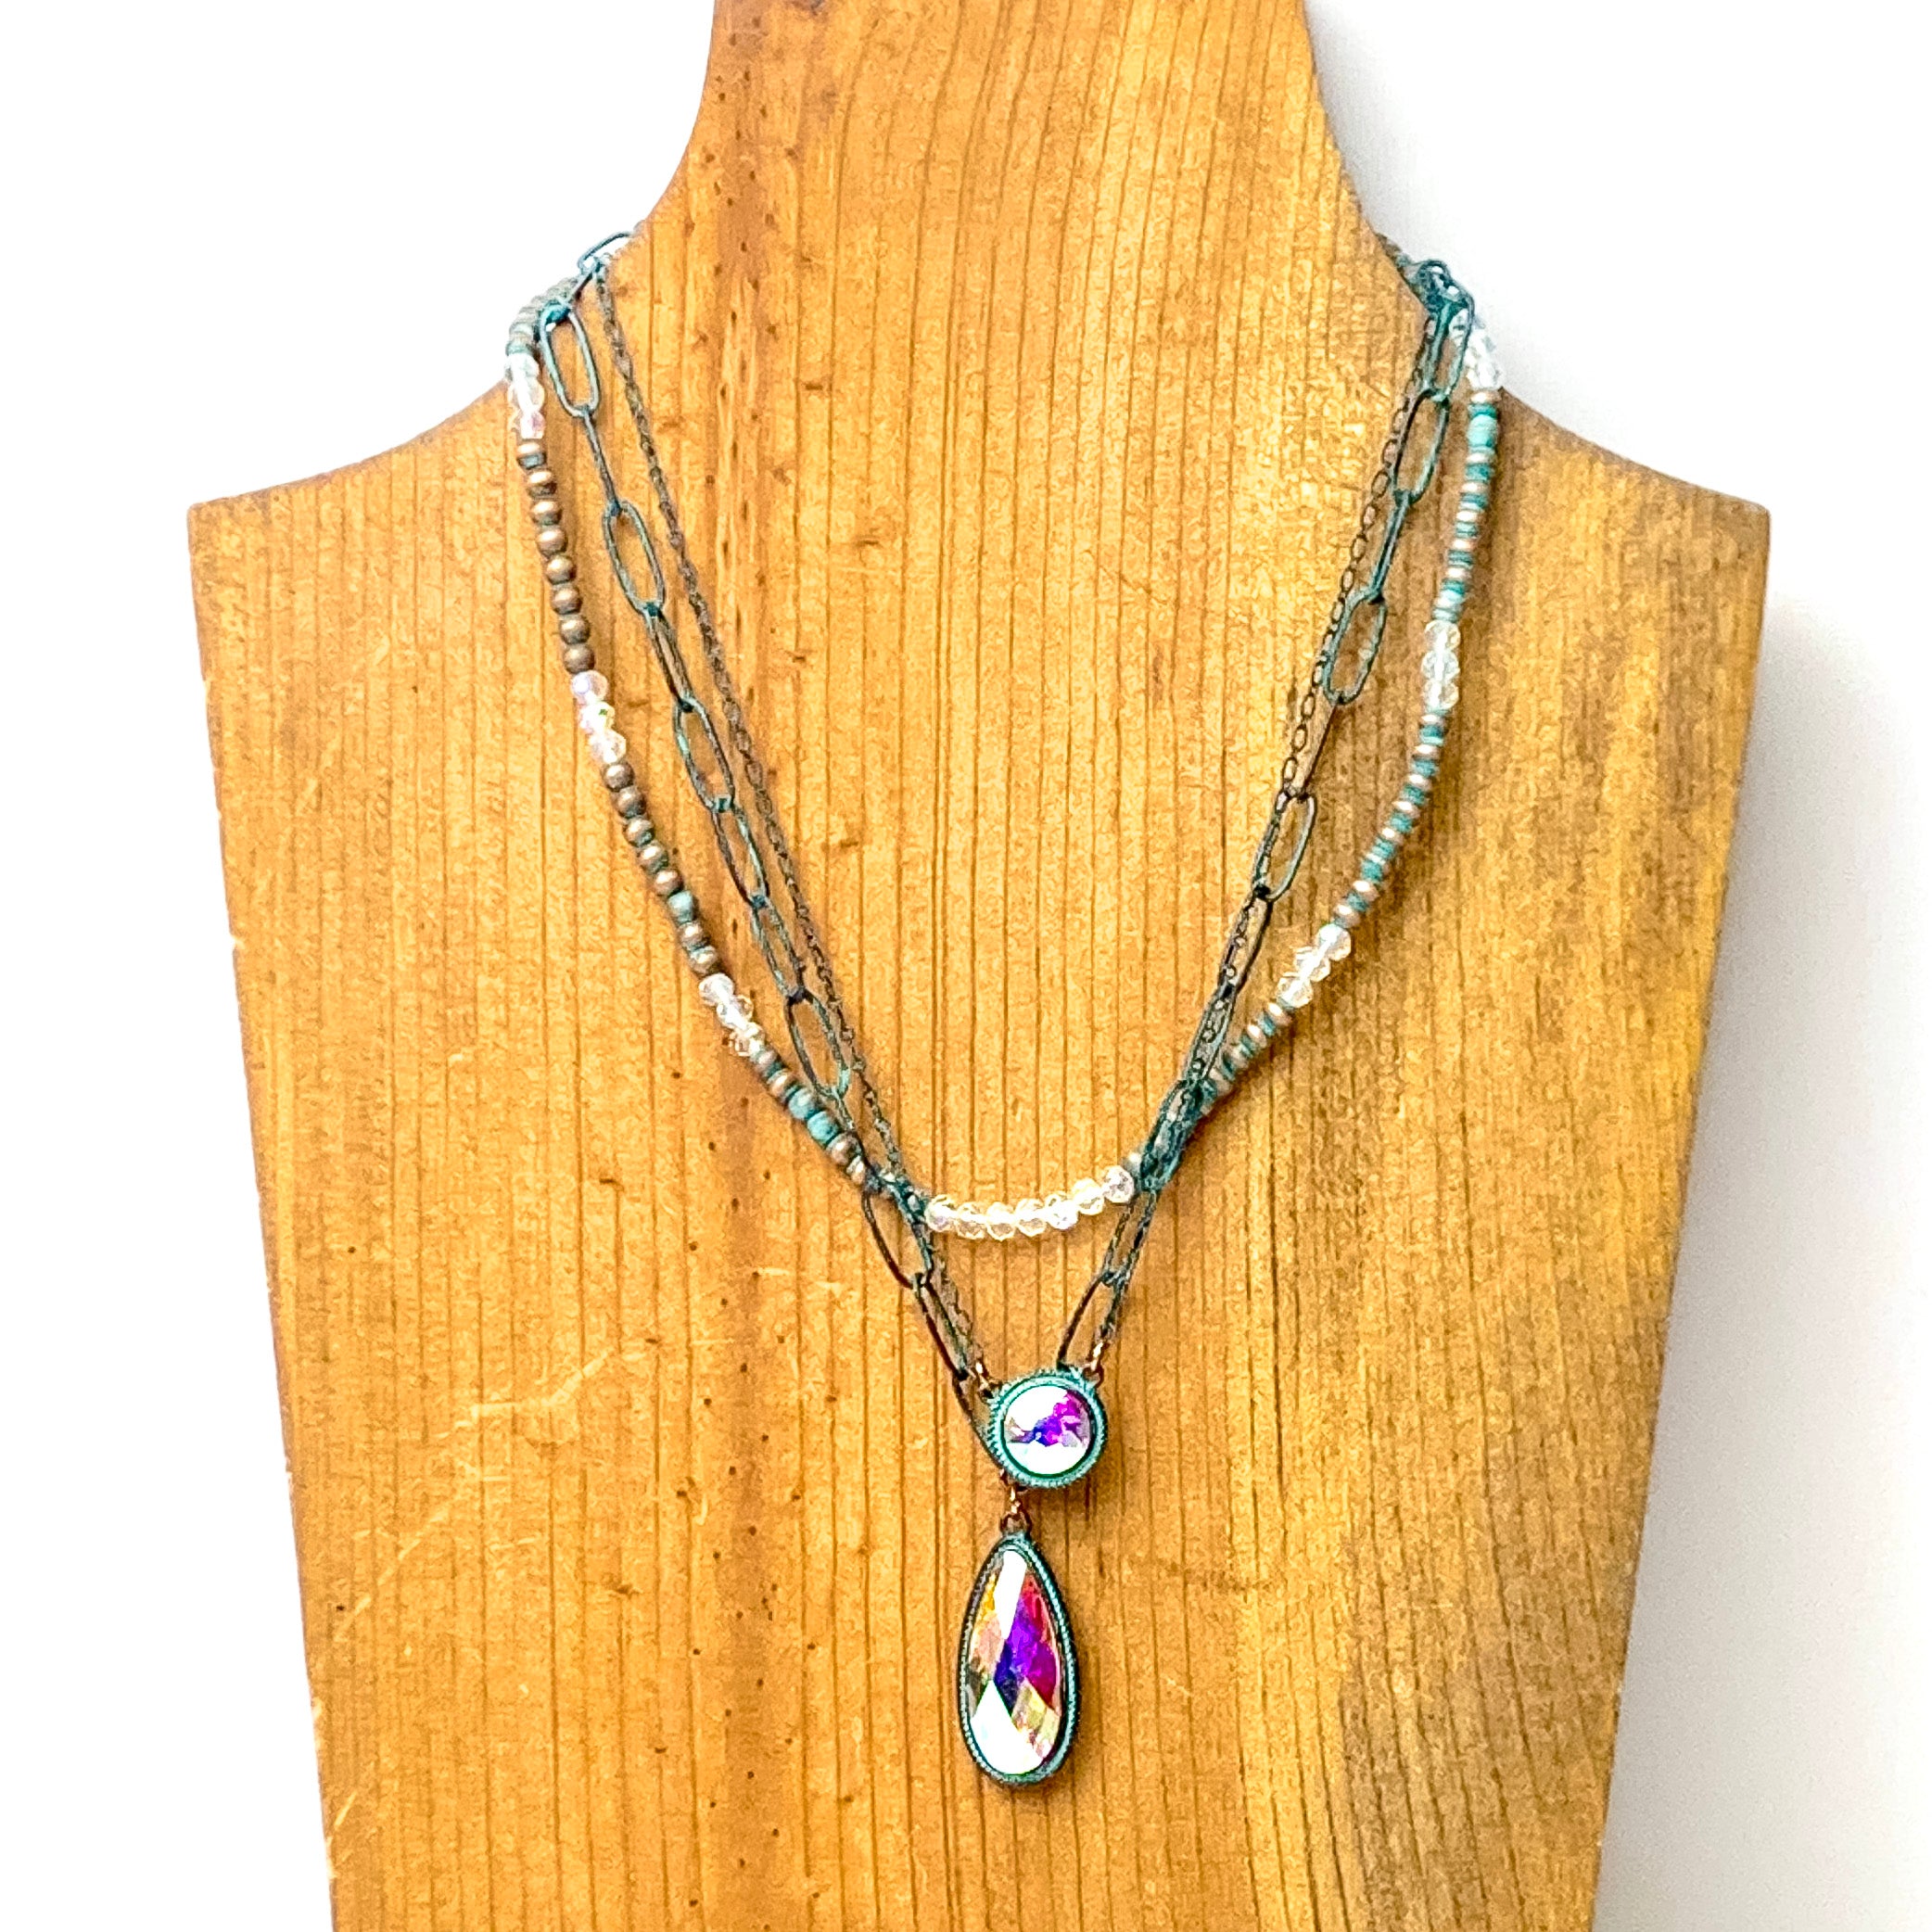 Three Row Faux Navajo Pearl Chain Necklace with AB Stone Pendants in Patina Tone - Giddy Up Glamour Boutique